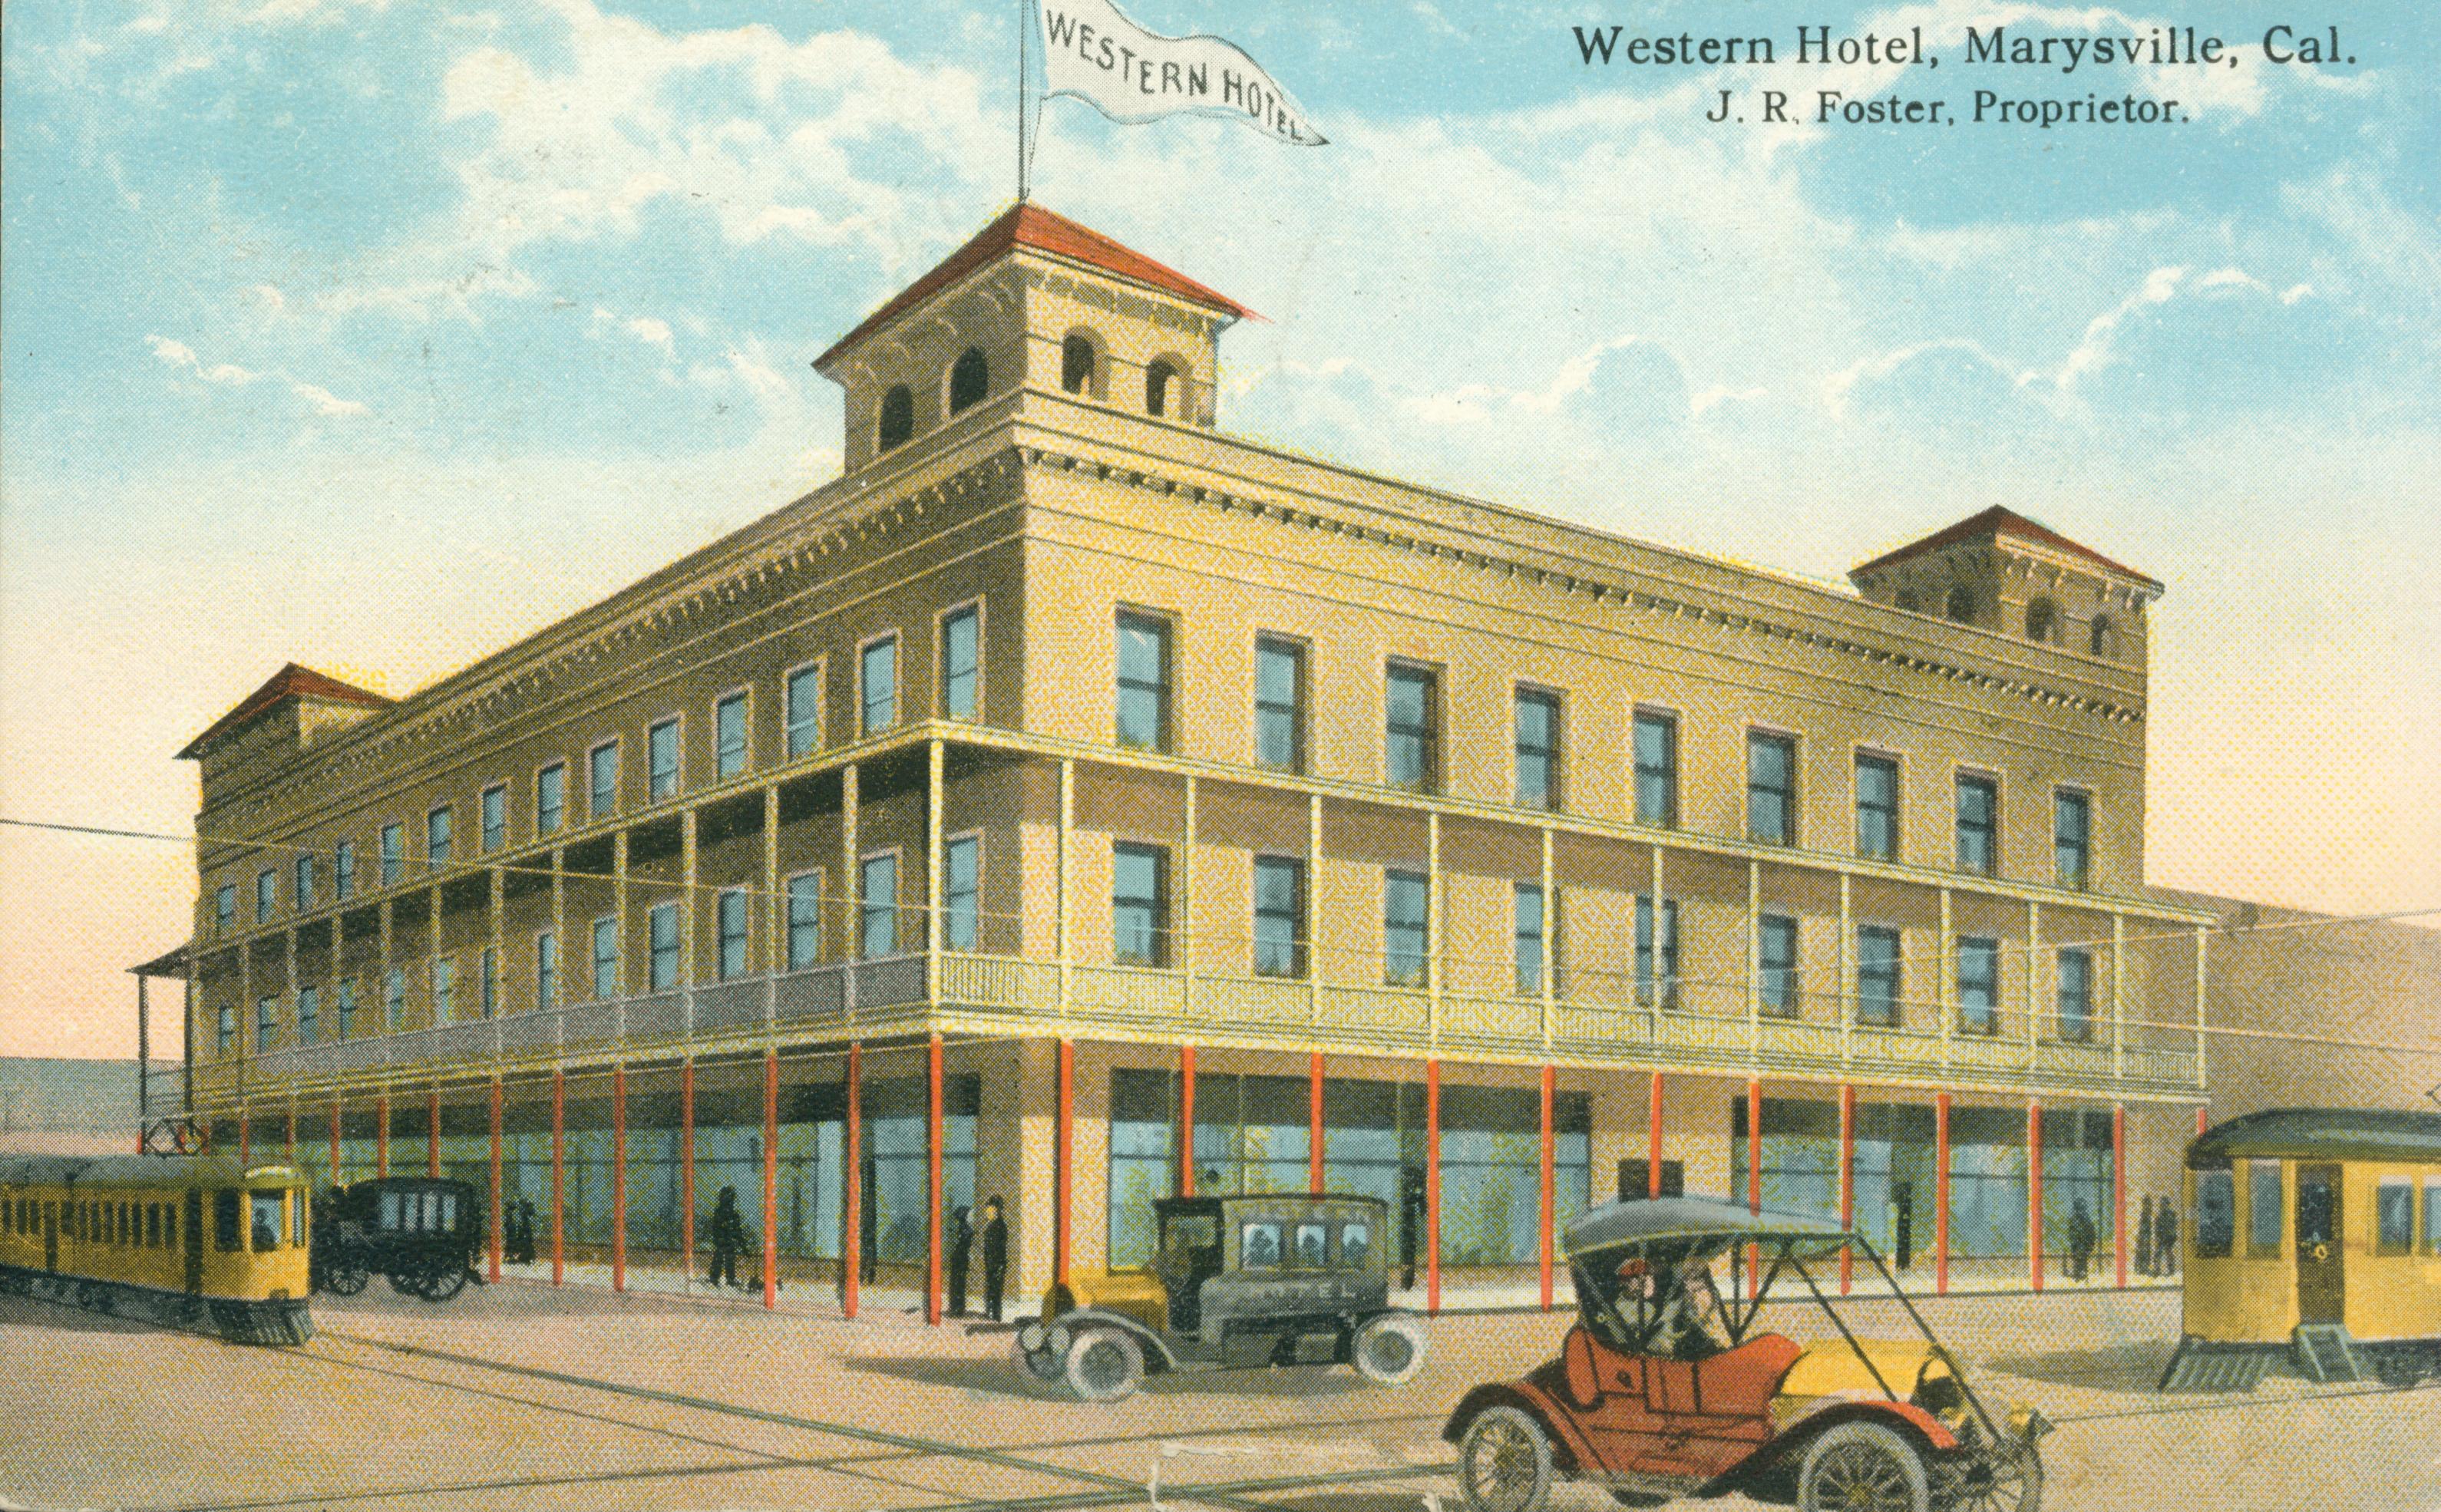 Shows a street-corner view of the Western Hotel with cars and street-cars passing by